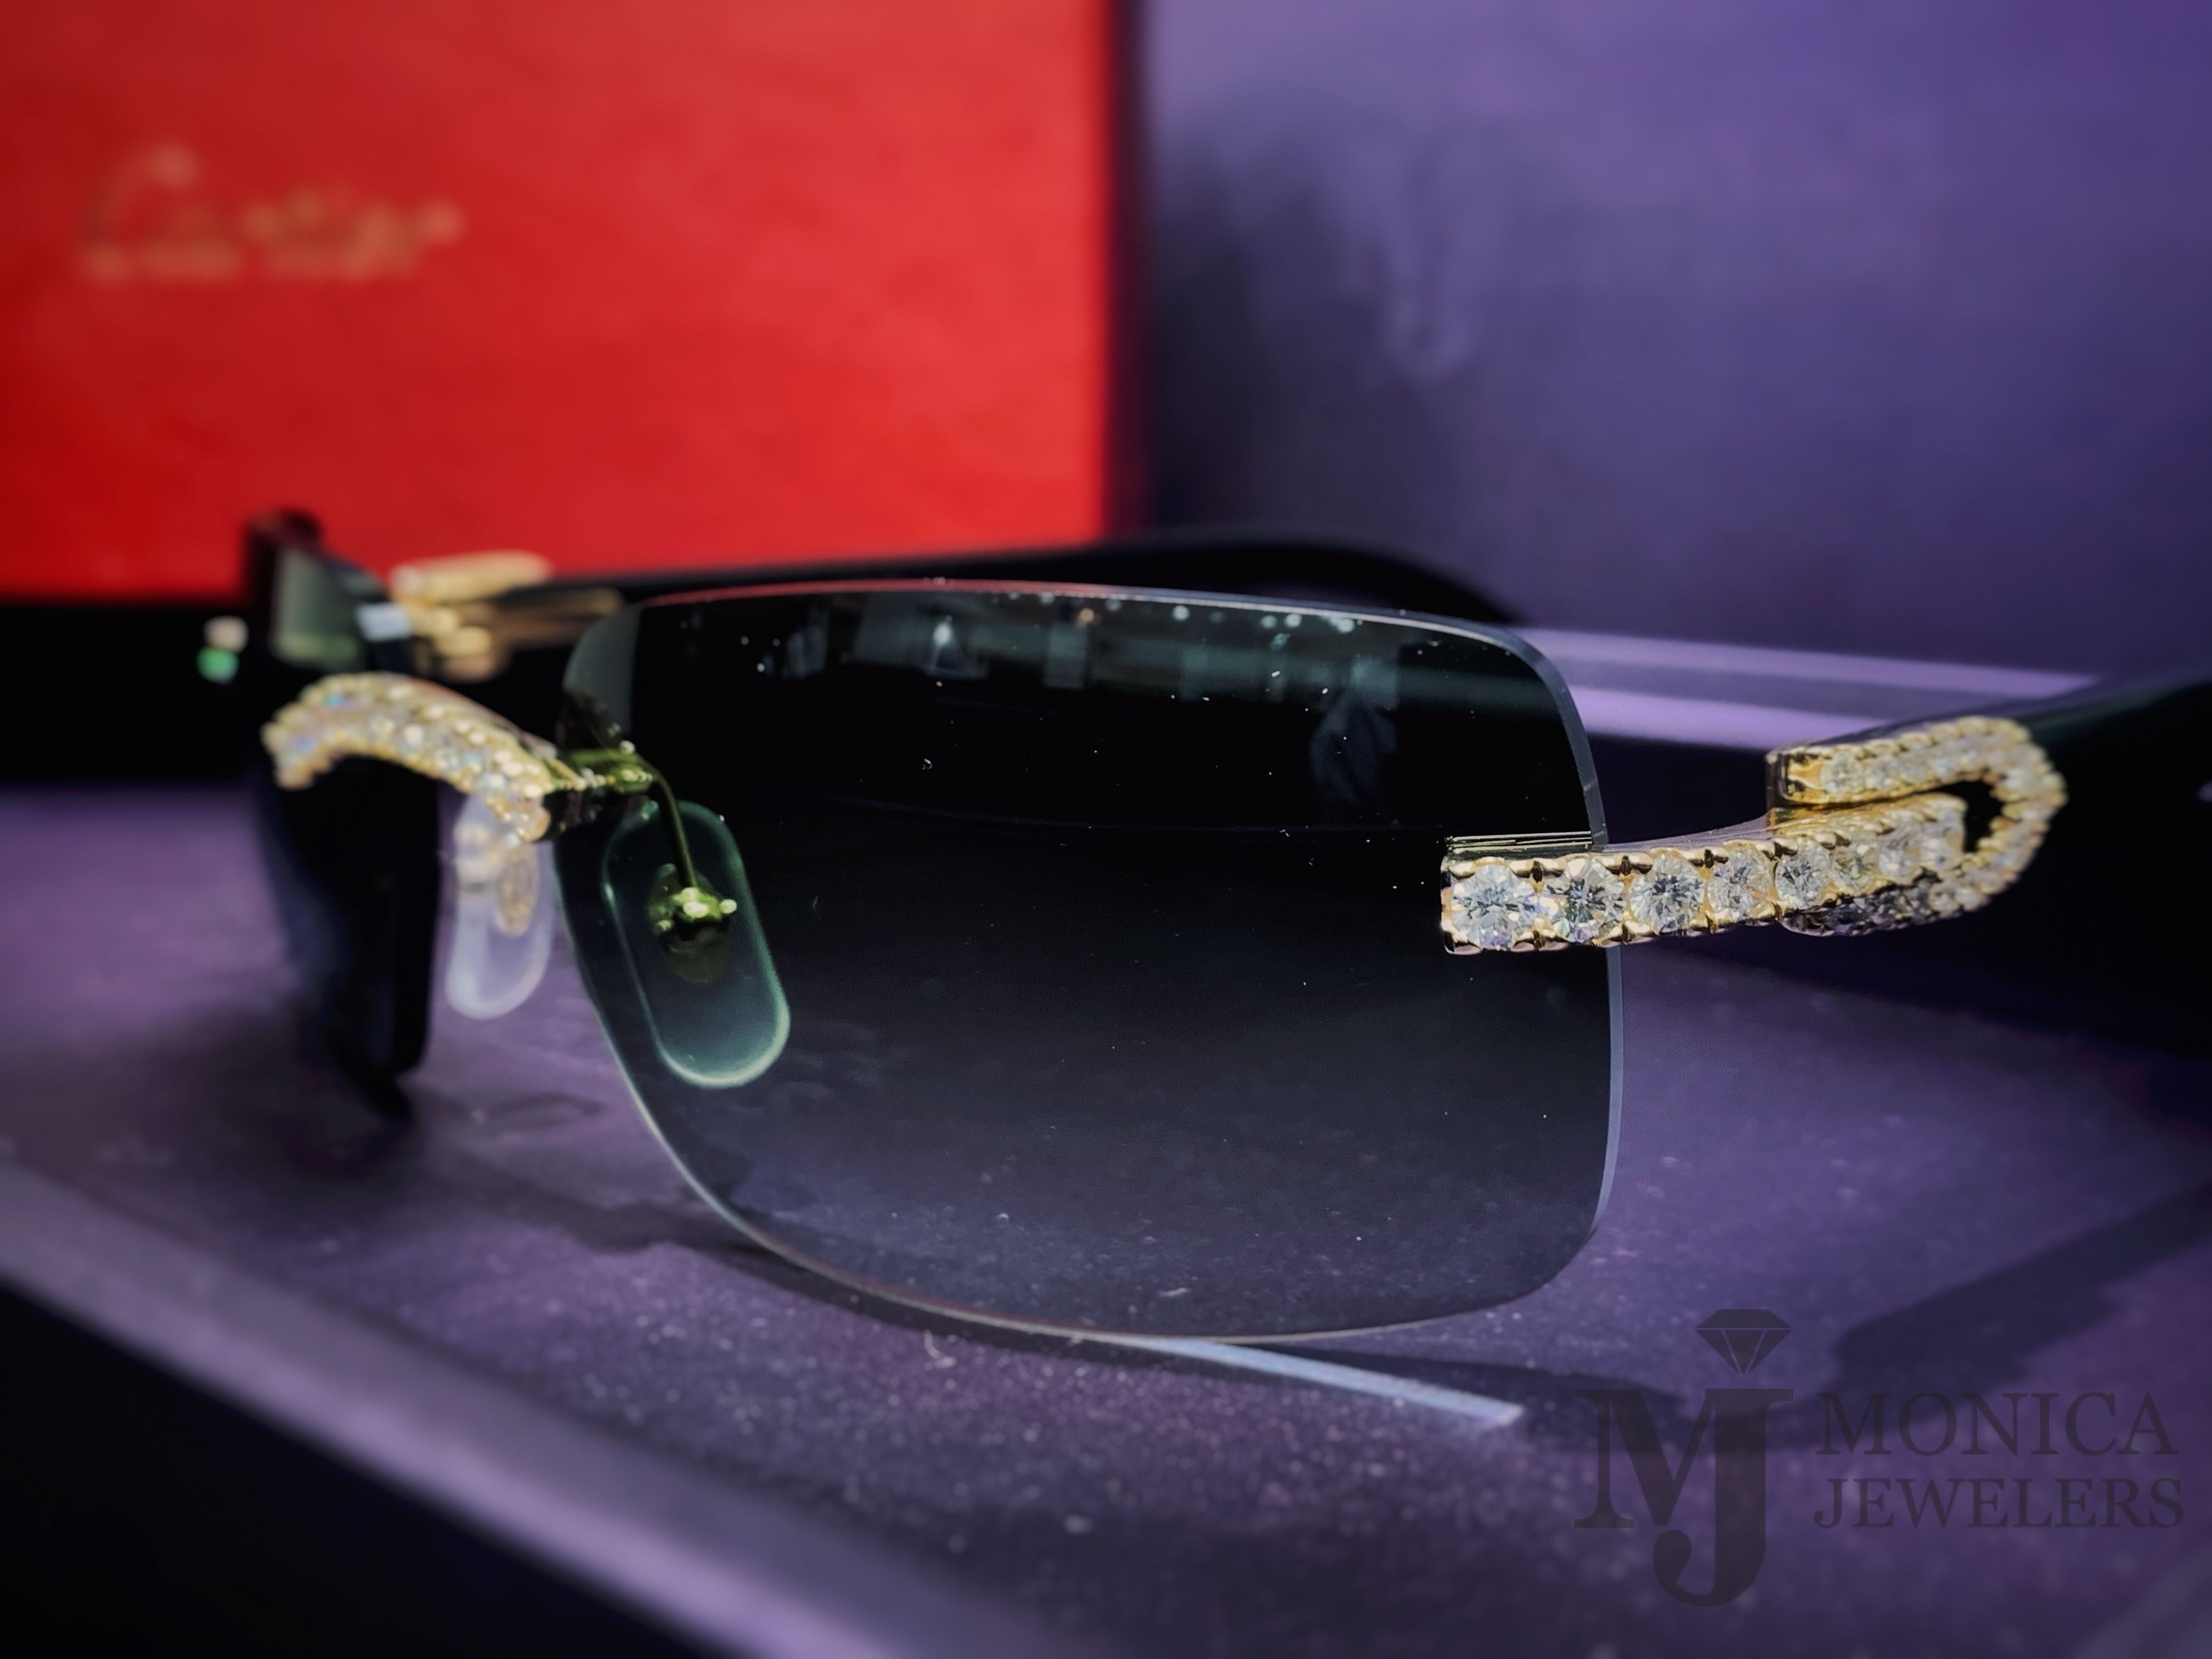 Cartier Glasses and Sunglasses – All Eyes On Me